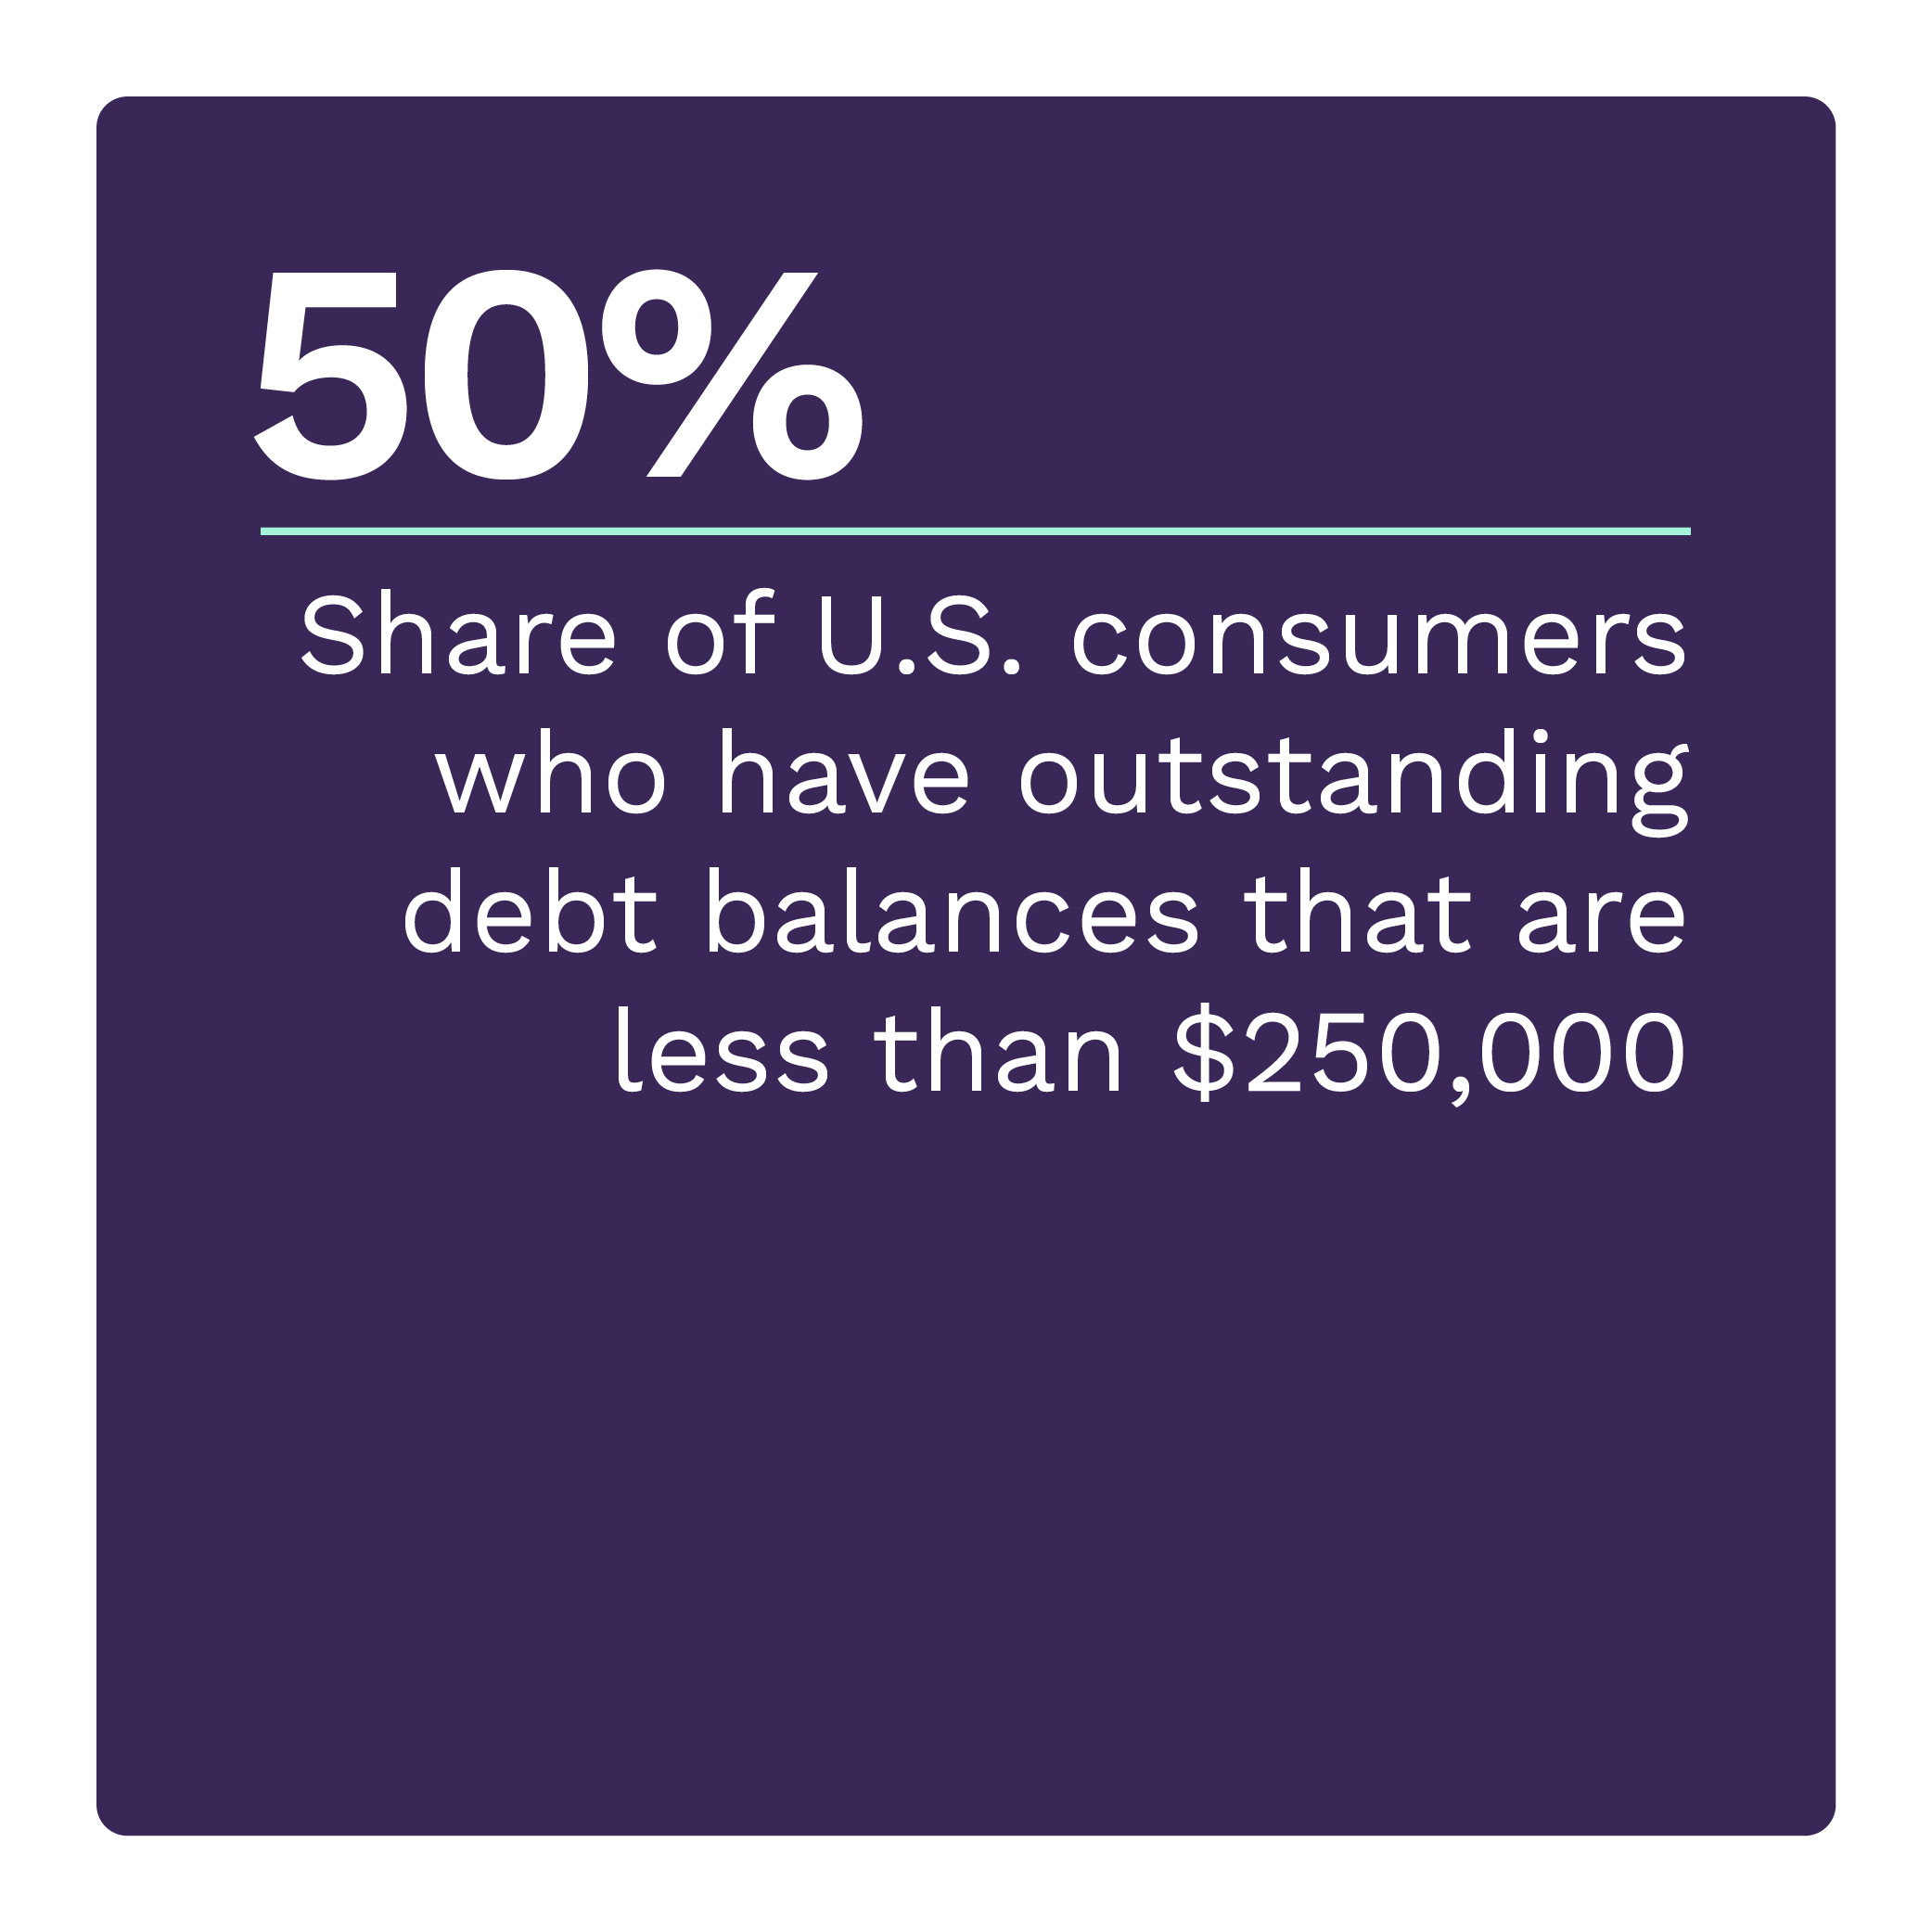 50%: Share of U.S. consumers who have outstanding debt balances that are less than $250,000